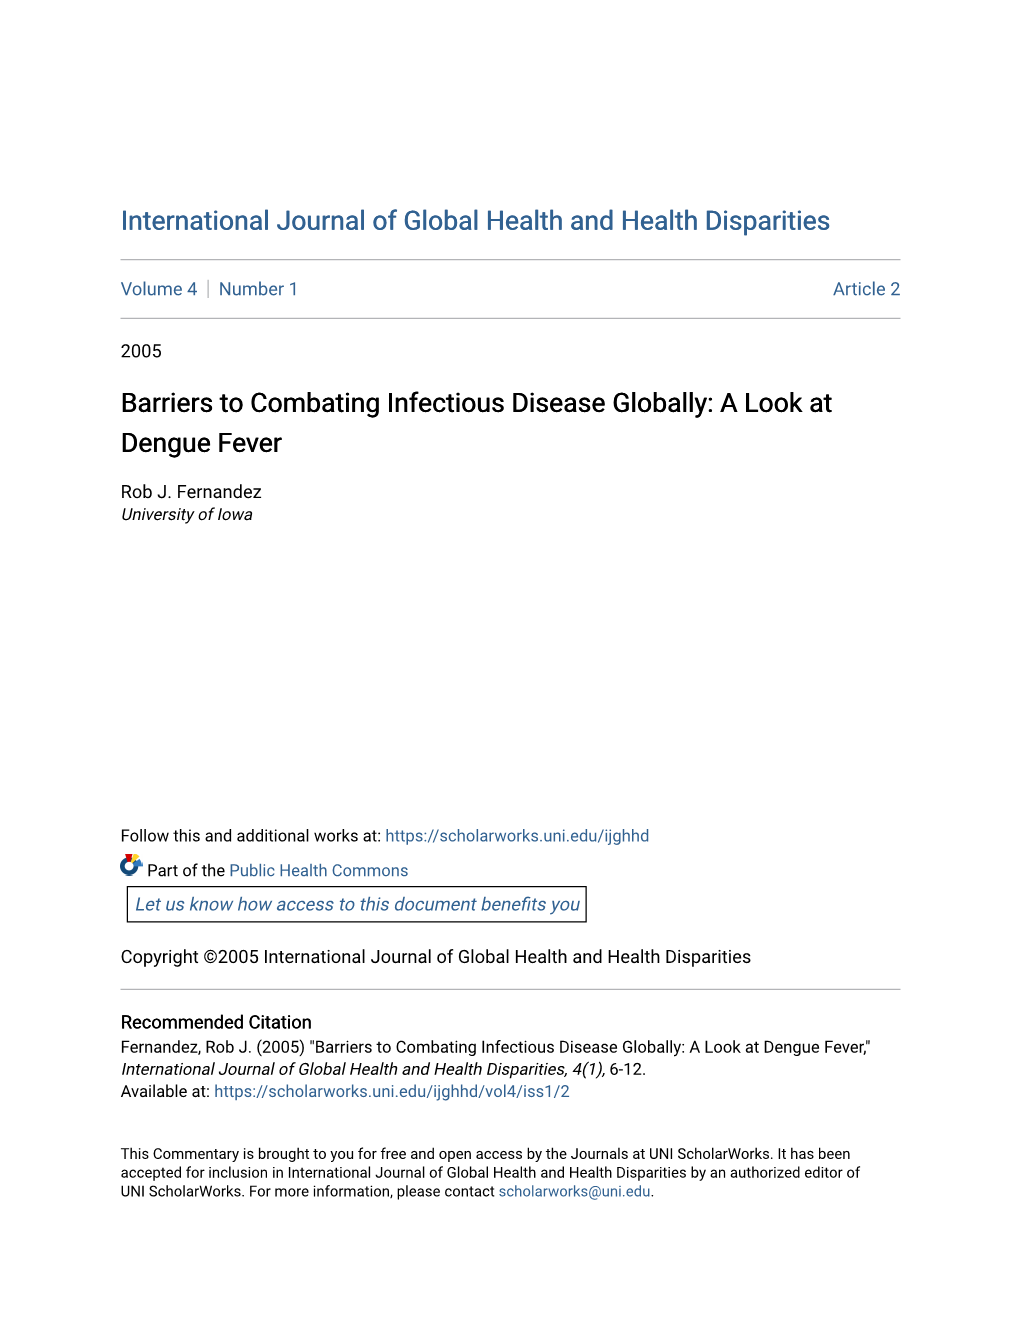 Barriers to Combating Infectious Disease Globally: a Look at Dengue Fever